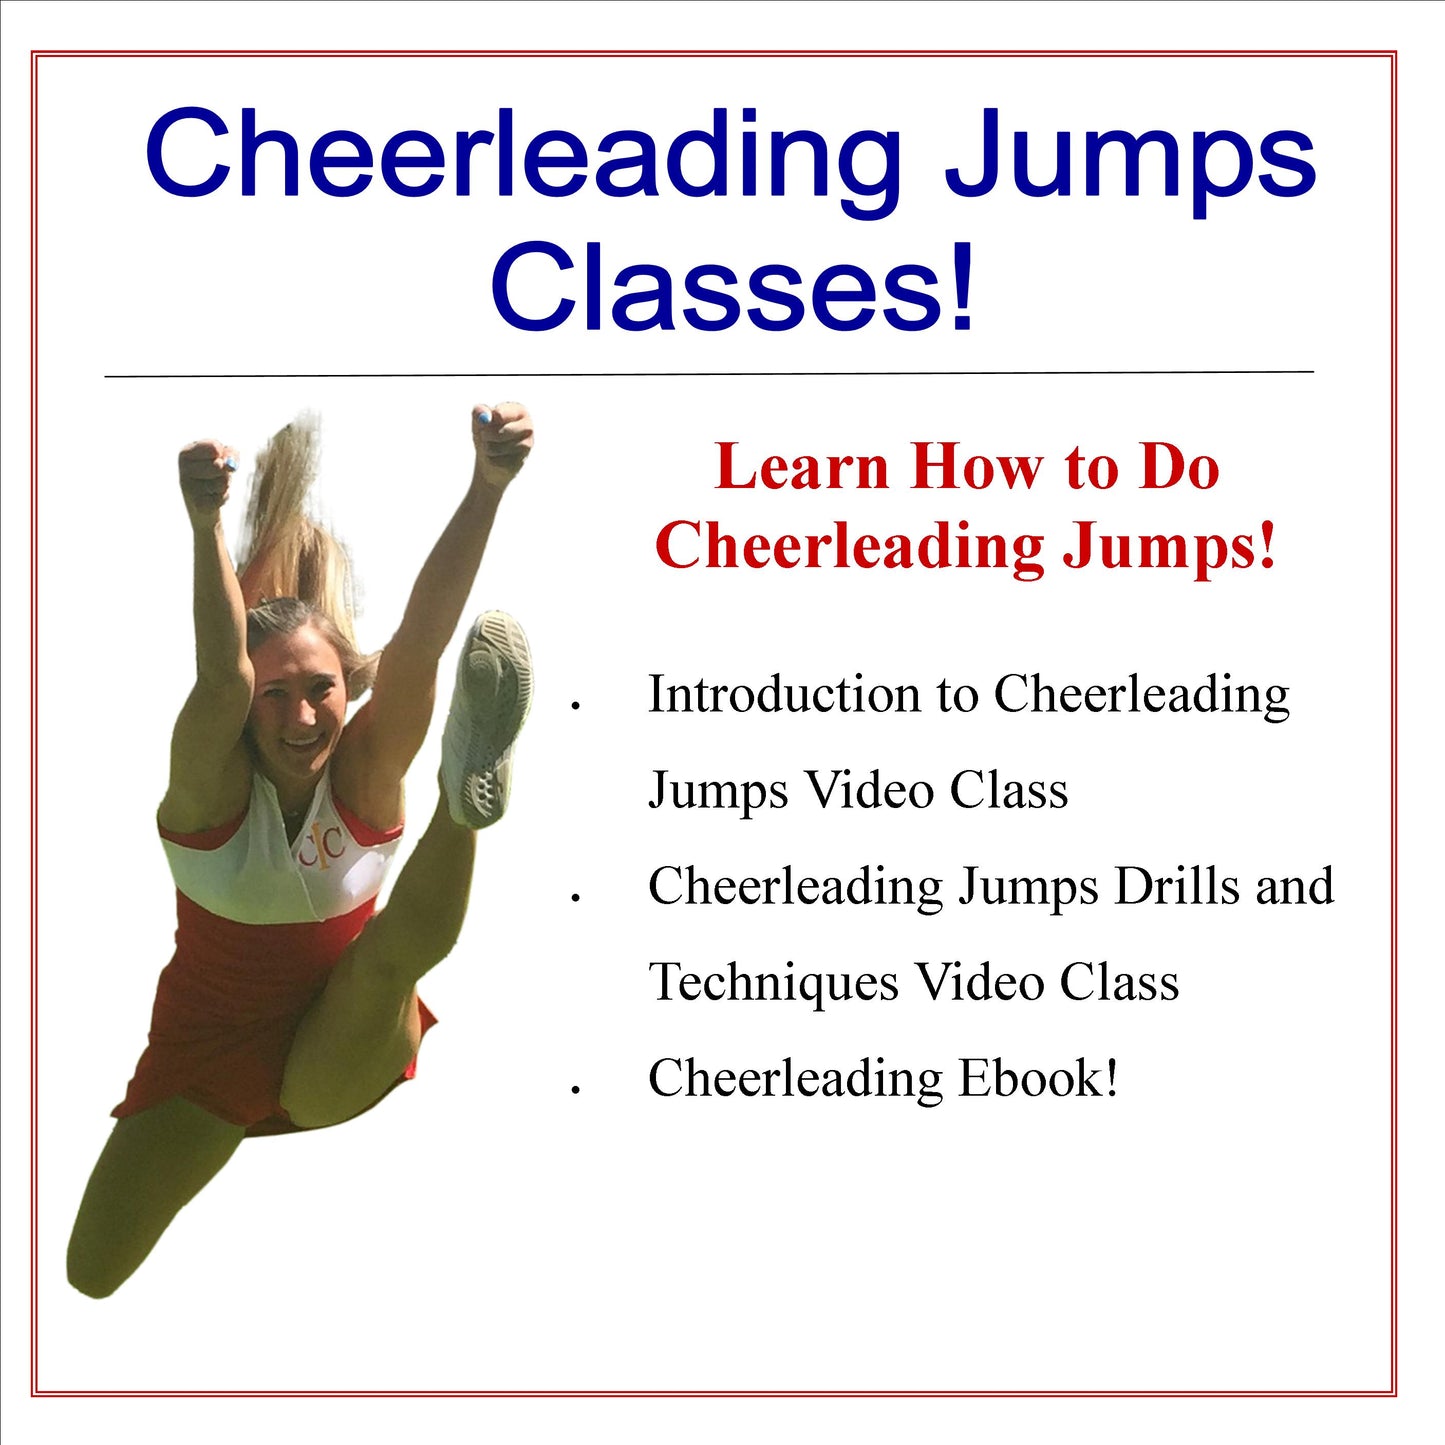 How to Do Cheerleading Jumps